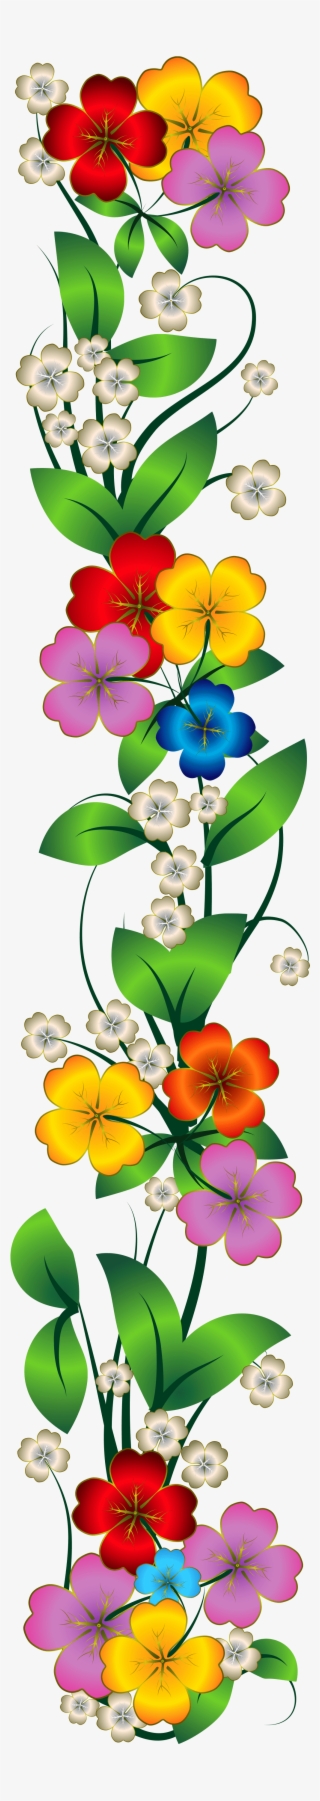 Chain Of Flowers Clipart